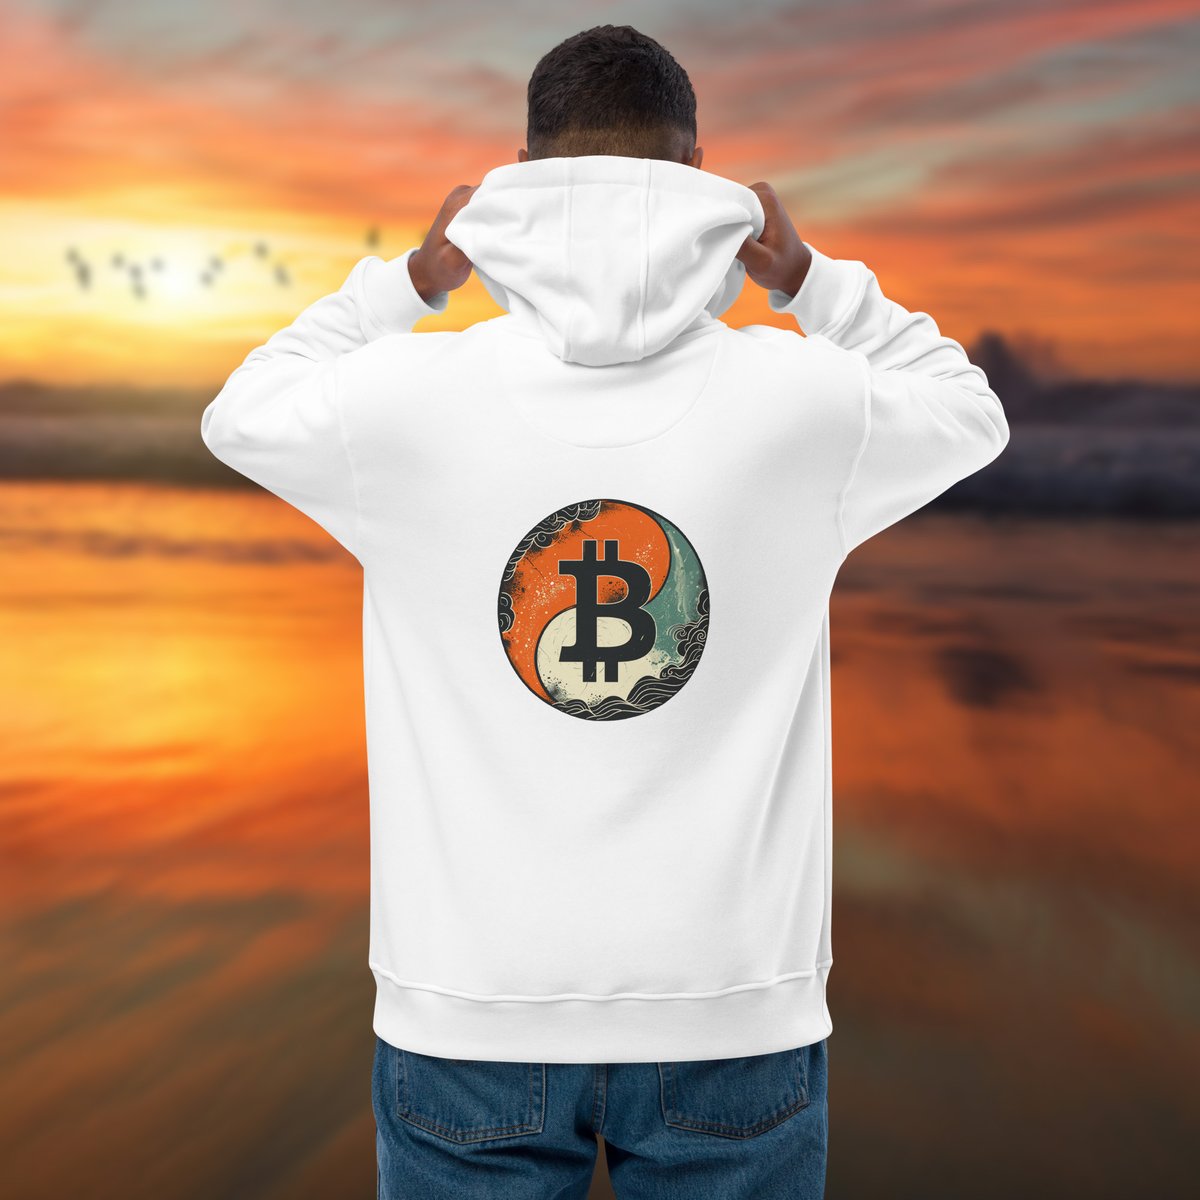 Find your Zen or chase the moon with our diverse range of men's crypto-themed hoodies🌅🌇🧘‍♂️₿

bitcoinagora.shop/collections/me…

#bitcoinagora
#cryptotrading
#apparel
#fashionclothing
#bitcoin
#satoshi
#cryptoapparel
#fashionmeetscrypto
#menhoodies
#hoodies
#cryptofashion
#cryptolifestyle